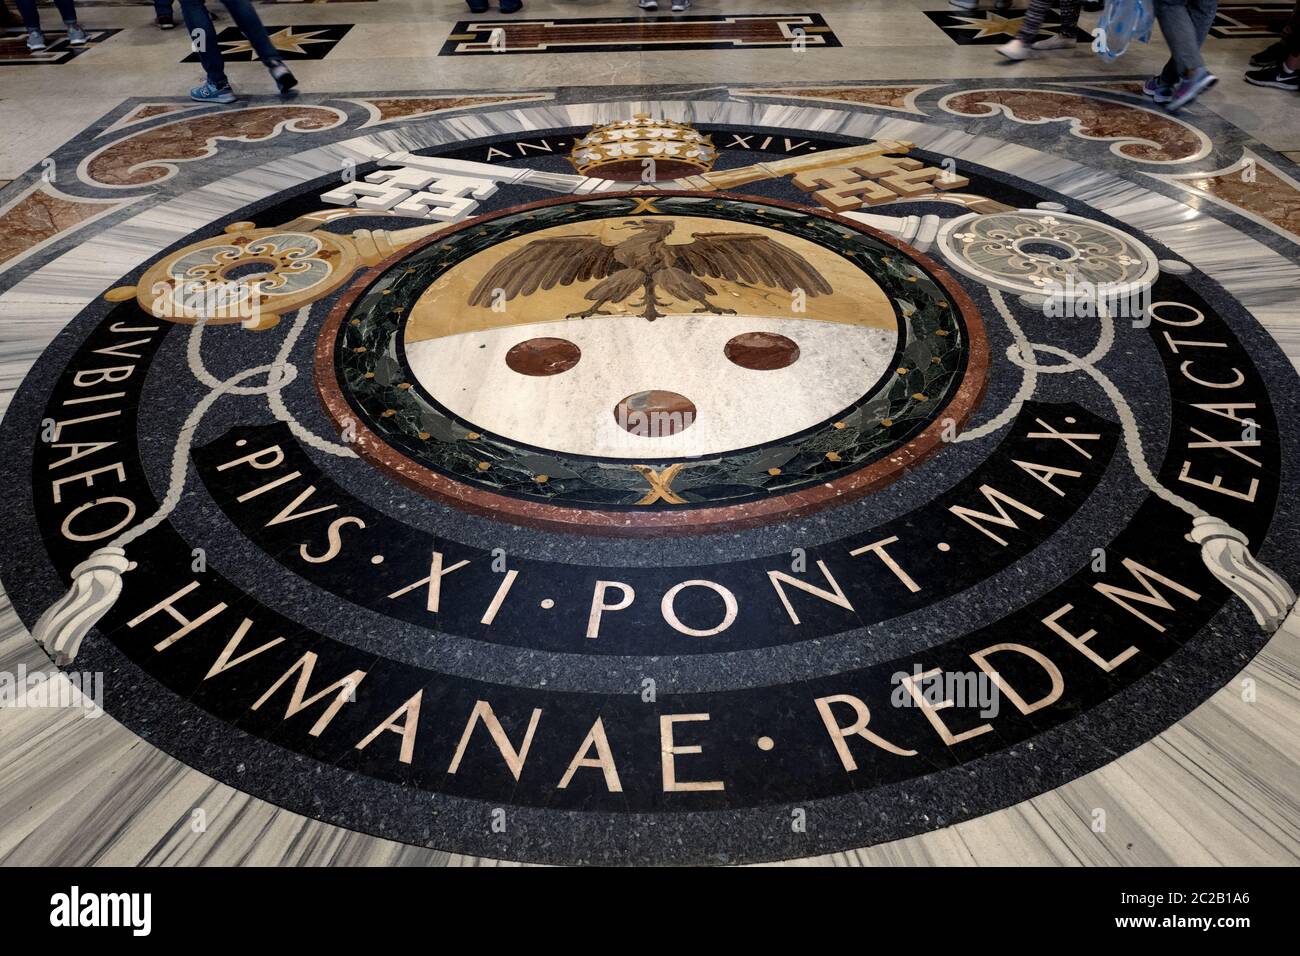 The Vatican's state symbol on the floor of the Saint Peter's cathedral, in Rome. Stock Photo